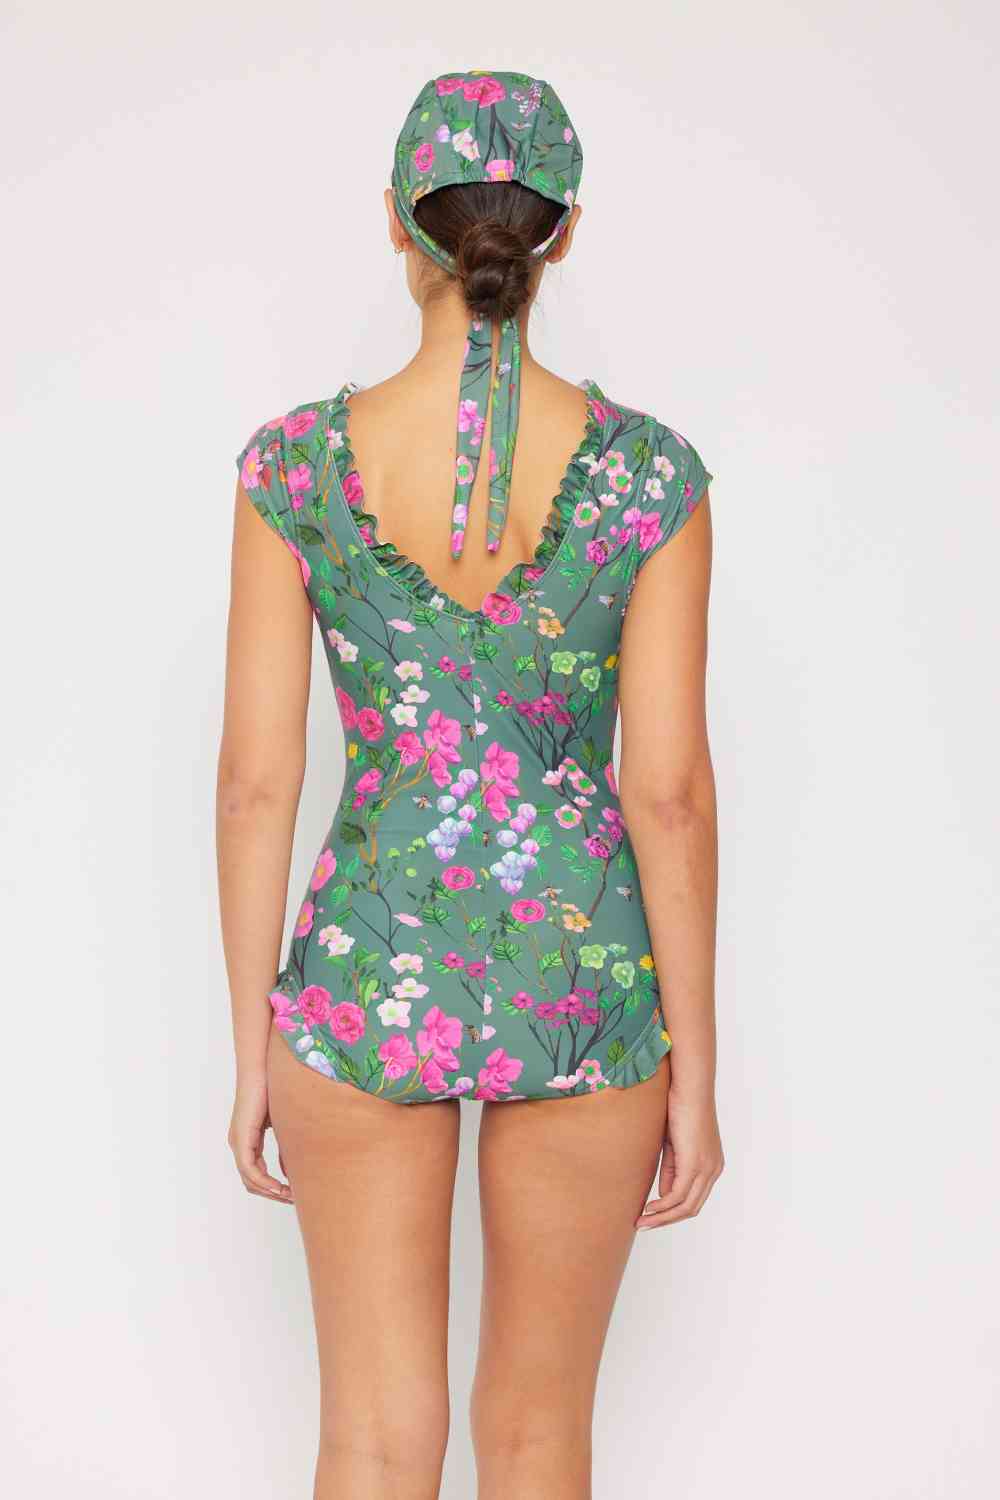 Marina West Swim Bring Me Flowers V-Neck One Piece Swimsuit In Sage - Sufyaa